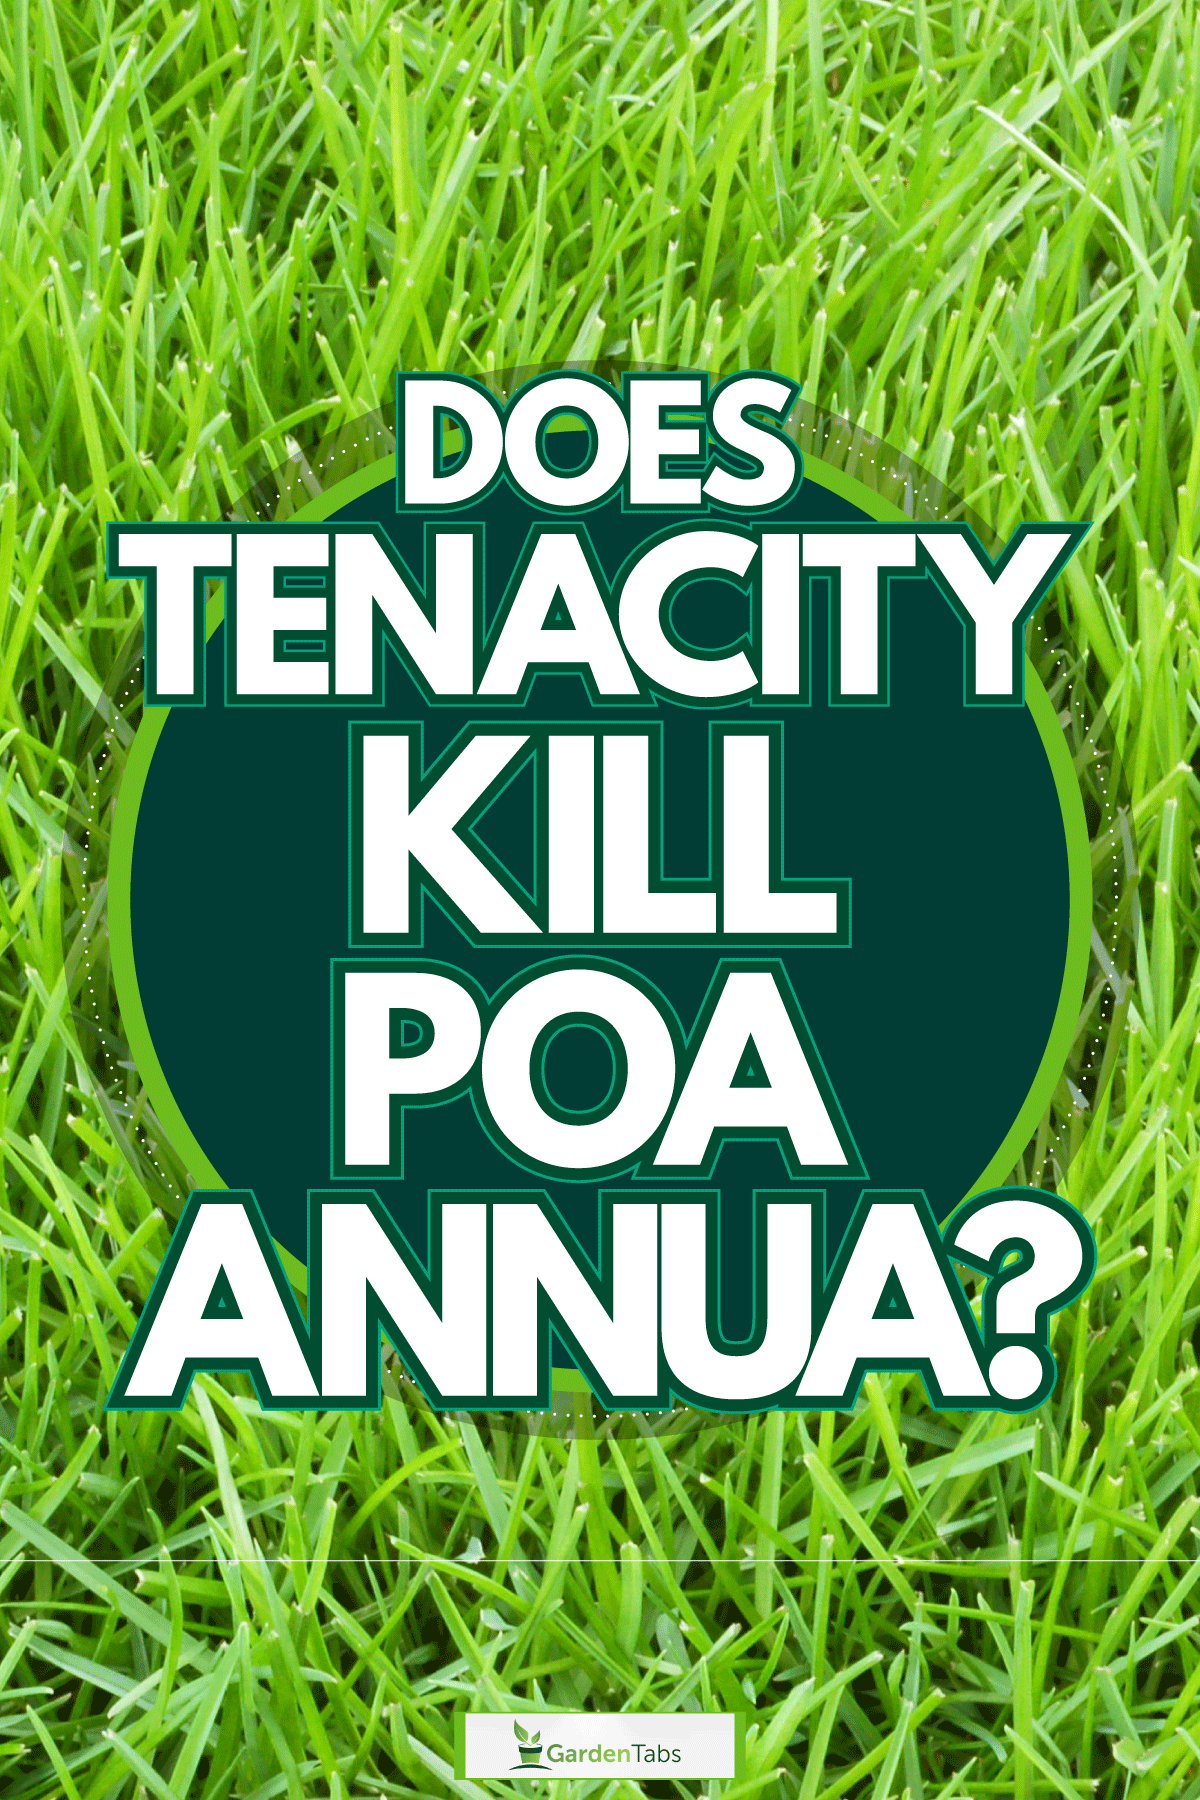 Transitioning of a healthy weed and dead weed, Transitioning of a healthy weed and dead weed, Does Tenacity Kill Poa Annua?